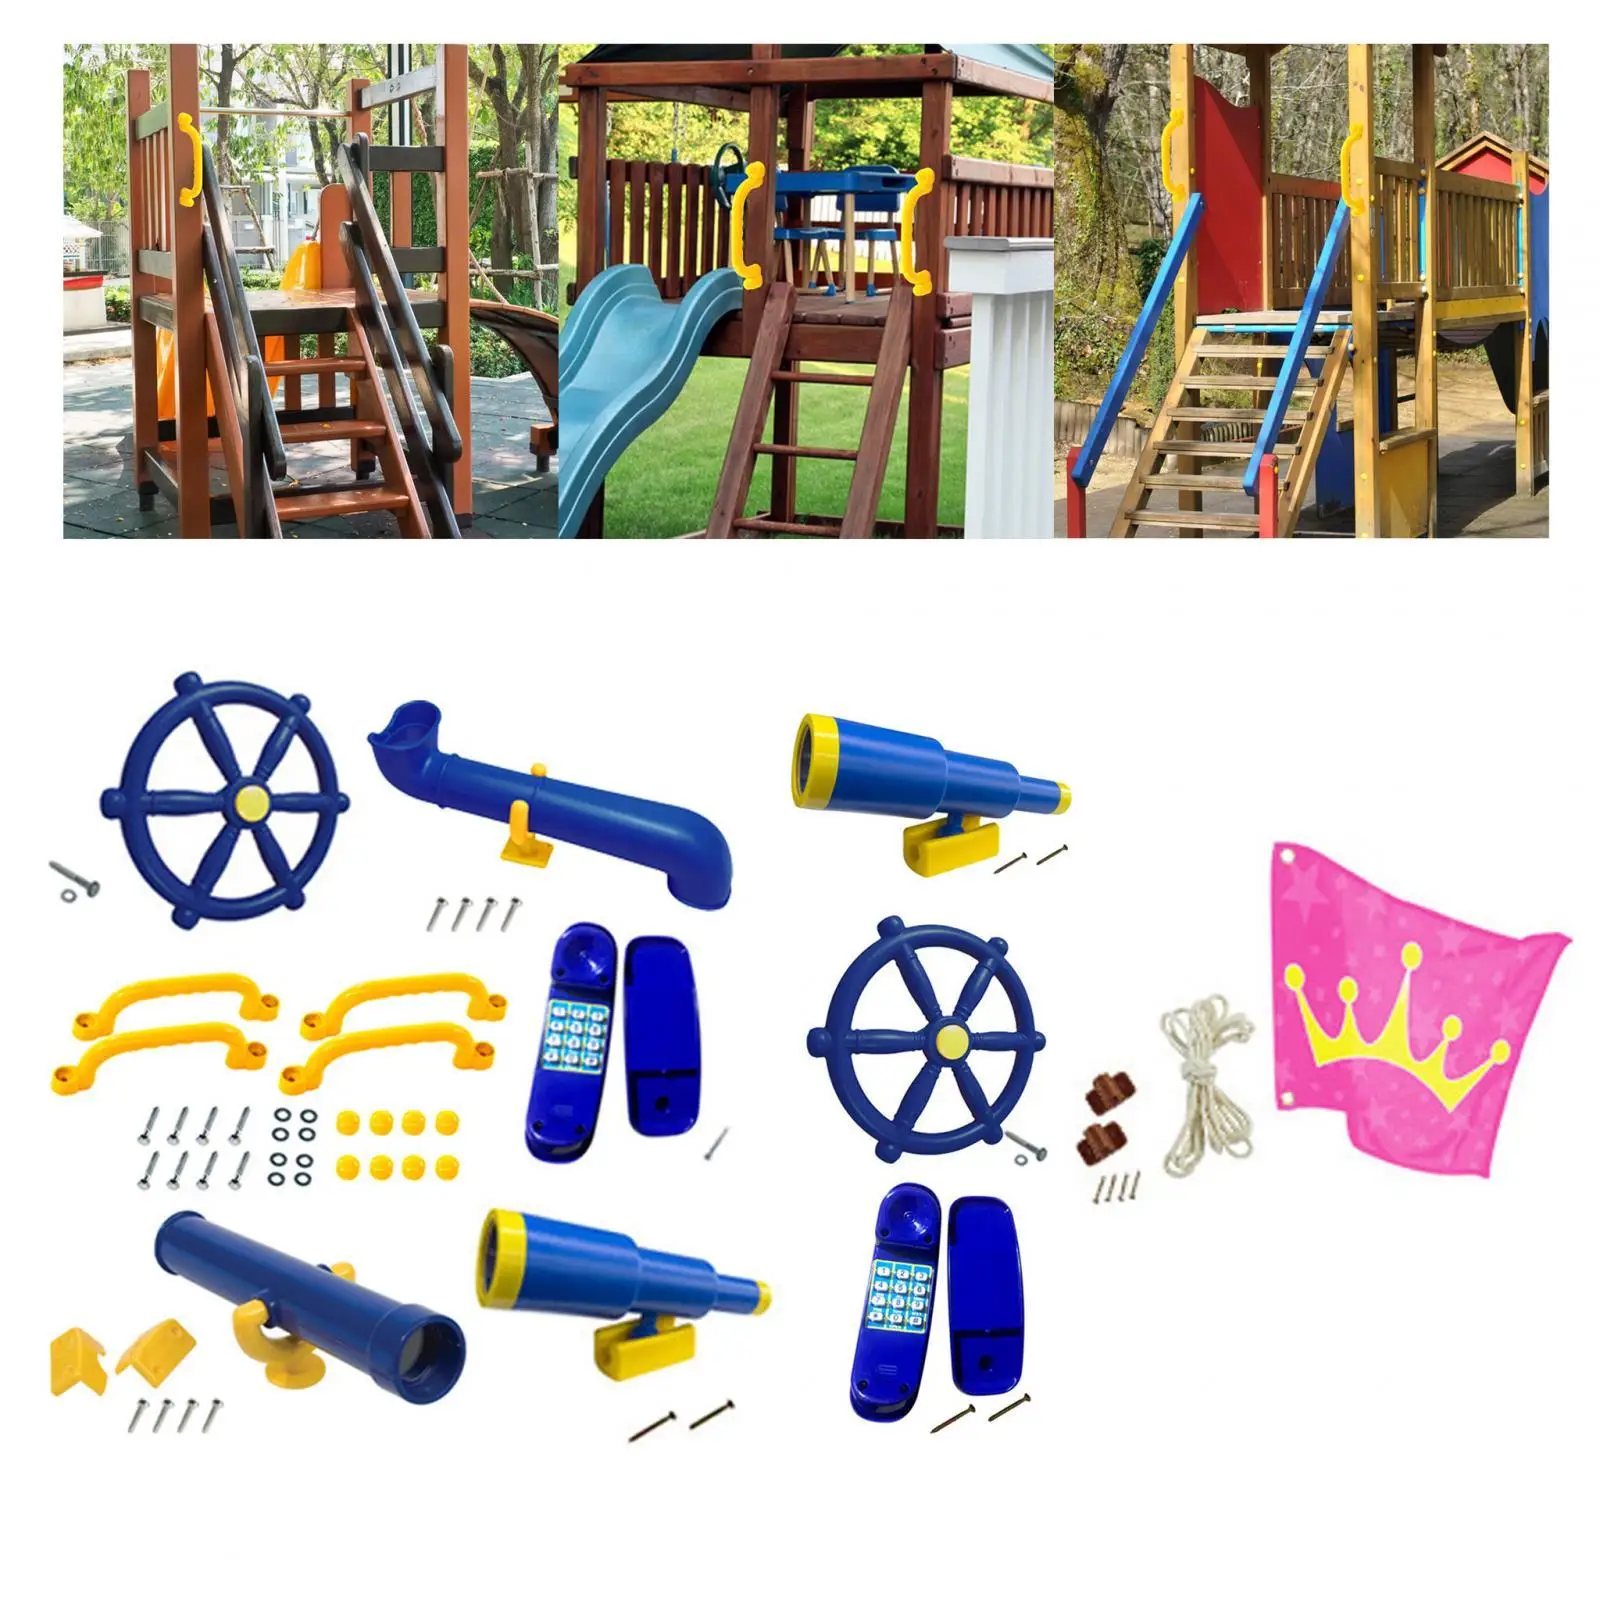 Playground Equipment Heavy Duty Outdoor Amusement Parts Swingset Attachments for Backyard Outdoor Swingset Playhouse Treehouse